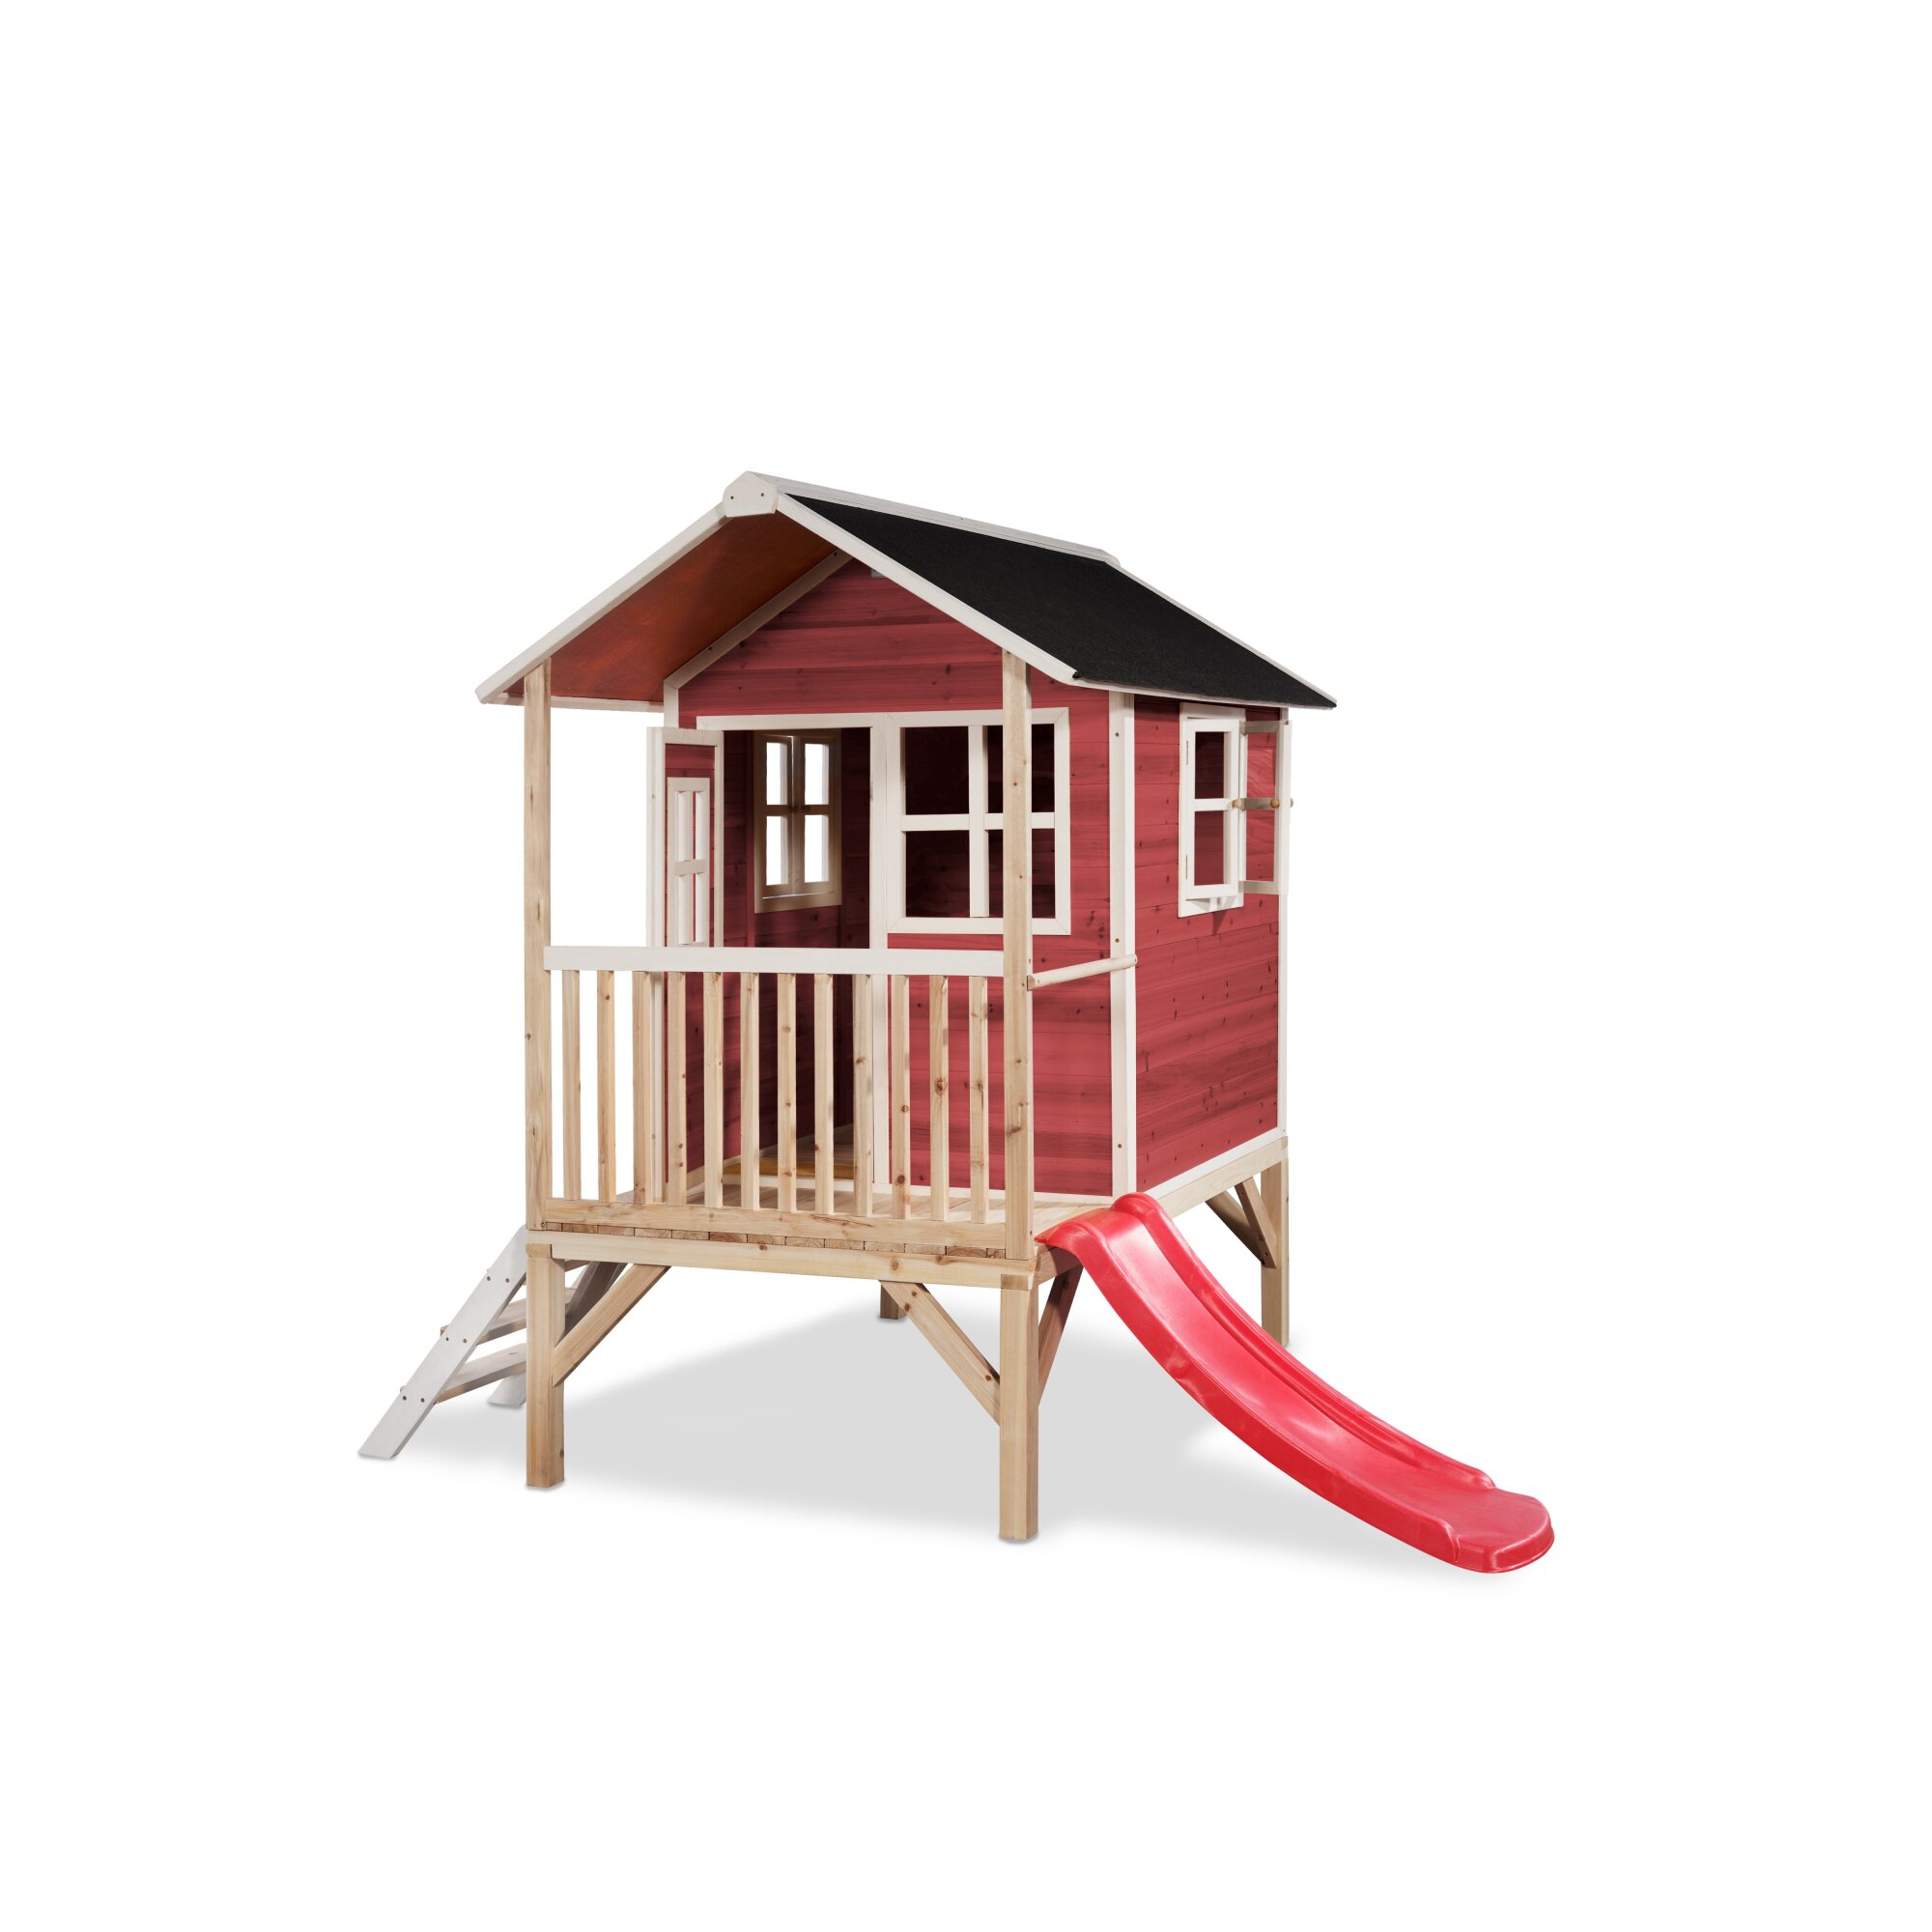 EXIT Loft 300 wooden playhouse - red